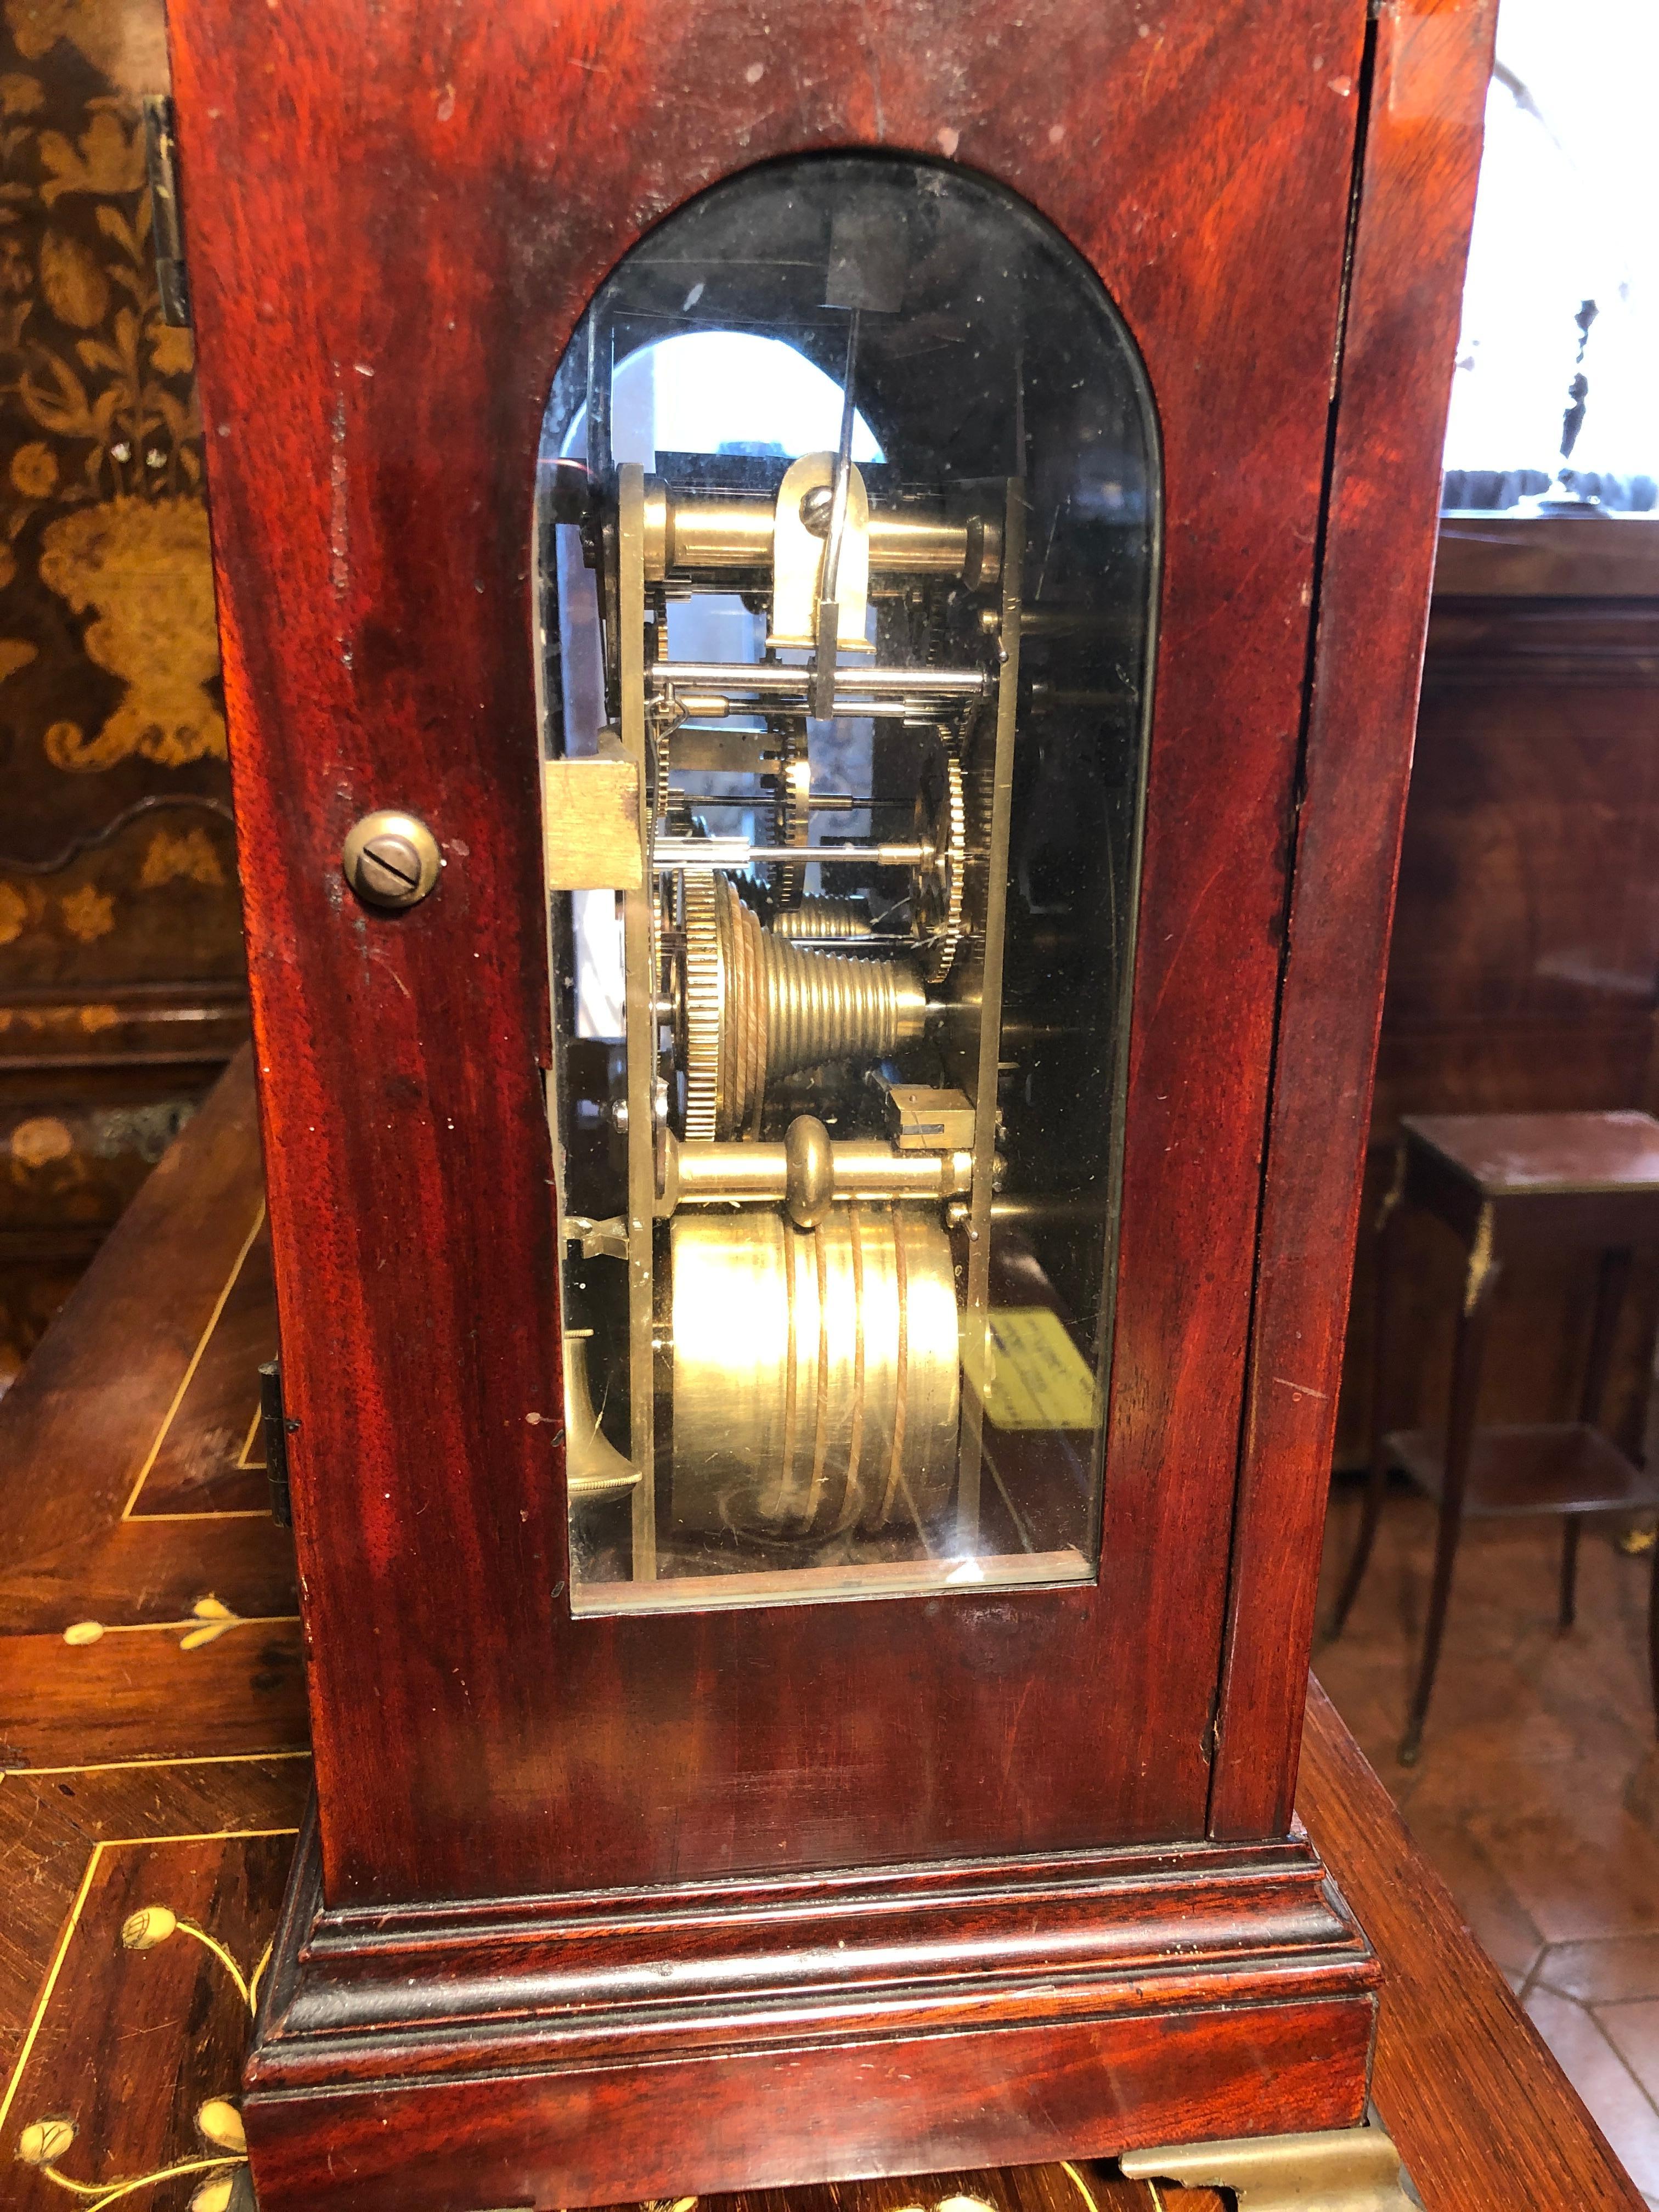 Bracket clock English, period George III, circa 1780, signed both the mechanism and the case. Signed Rivers and Son the mechanism, already revised, while the case is signed W.R. with serial number. In mahogany. Completely original except for a